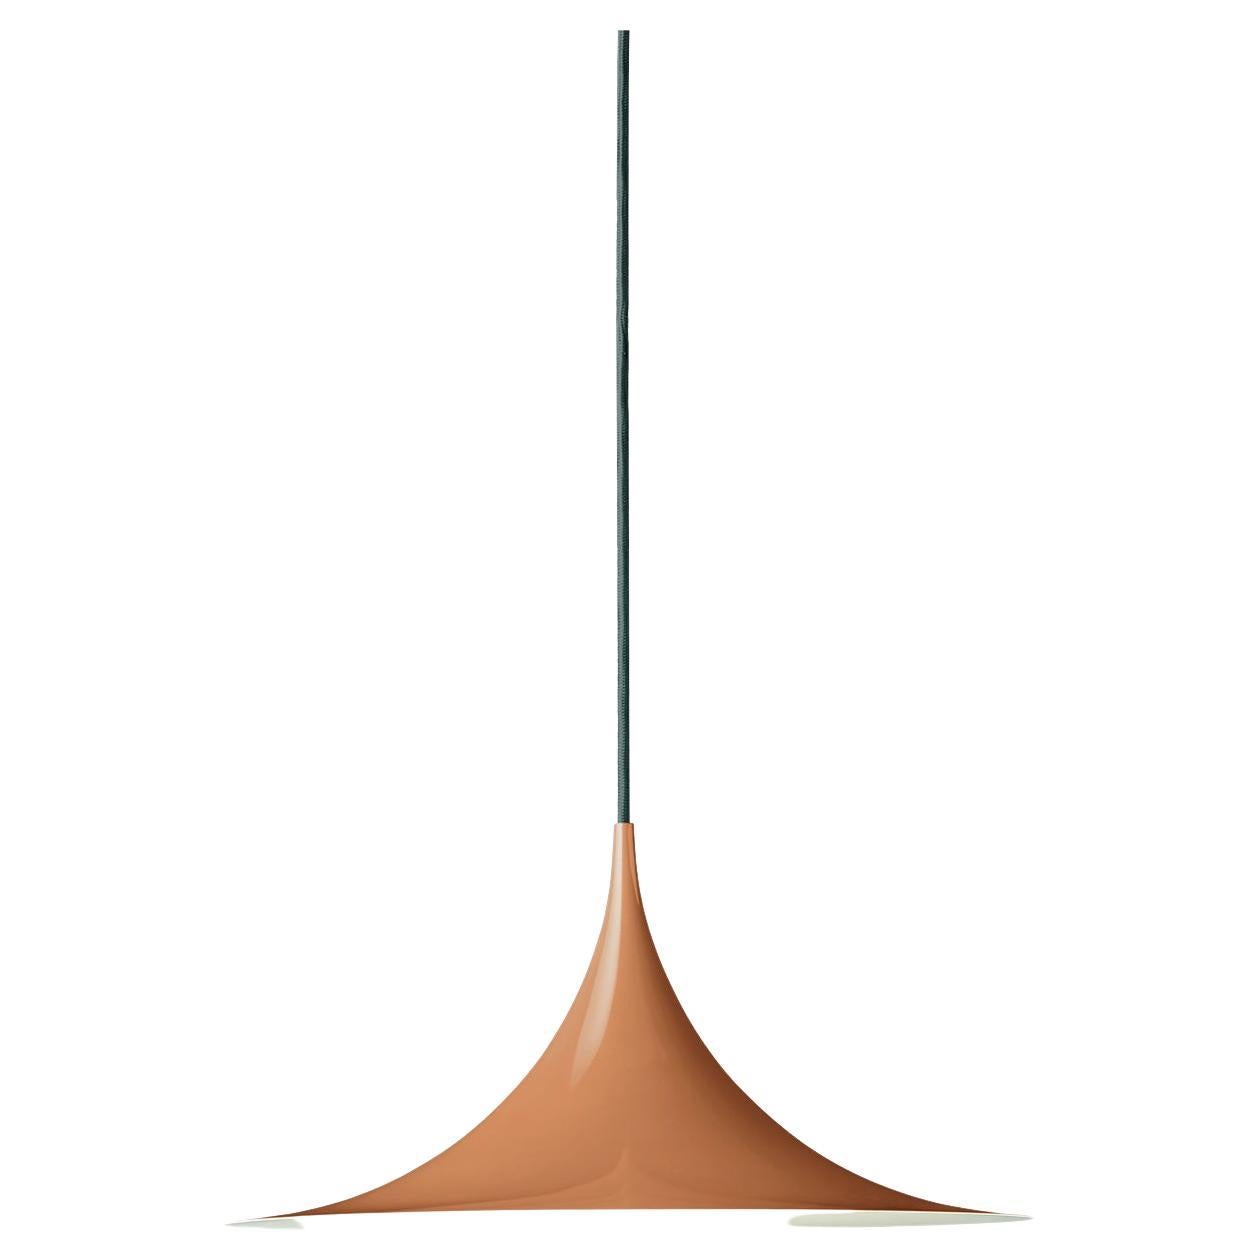 The semi pendant is a unique pendant lamp, based on two quarter-circles put together, back-to-back. It’s distinctive arch-shaped, enamelled metal shade creates a diffused, cone-shaped light, ideal over a dining table or kitchen work surface. With